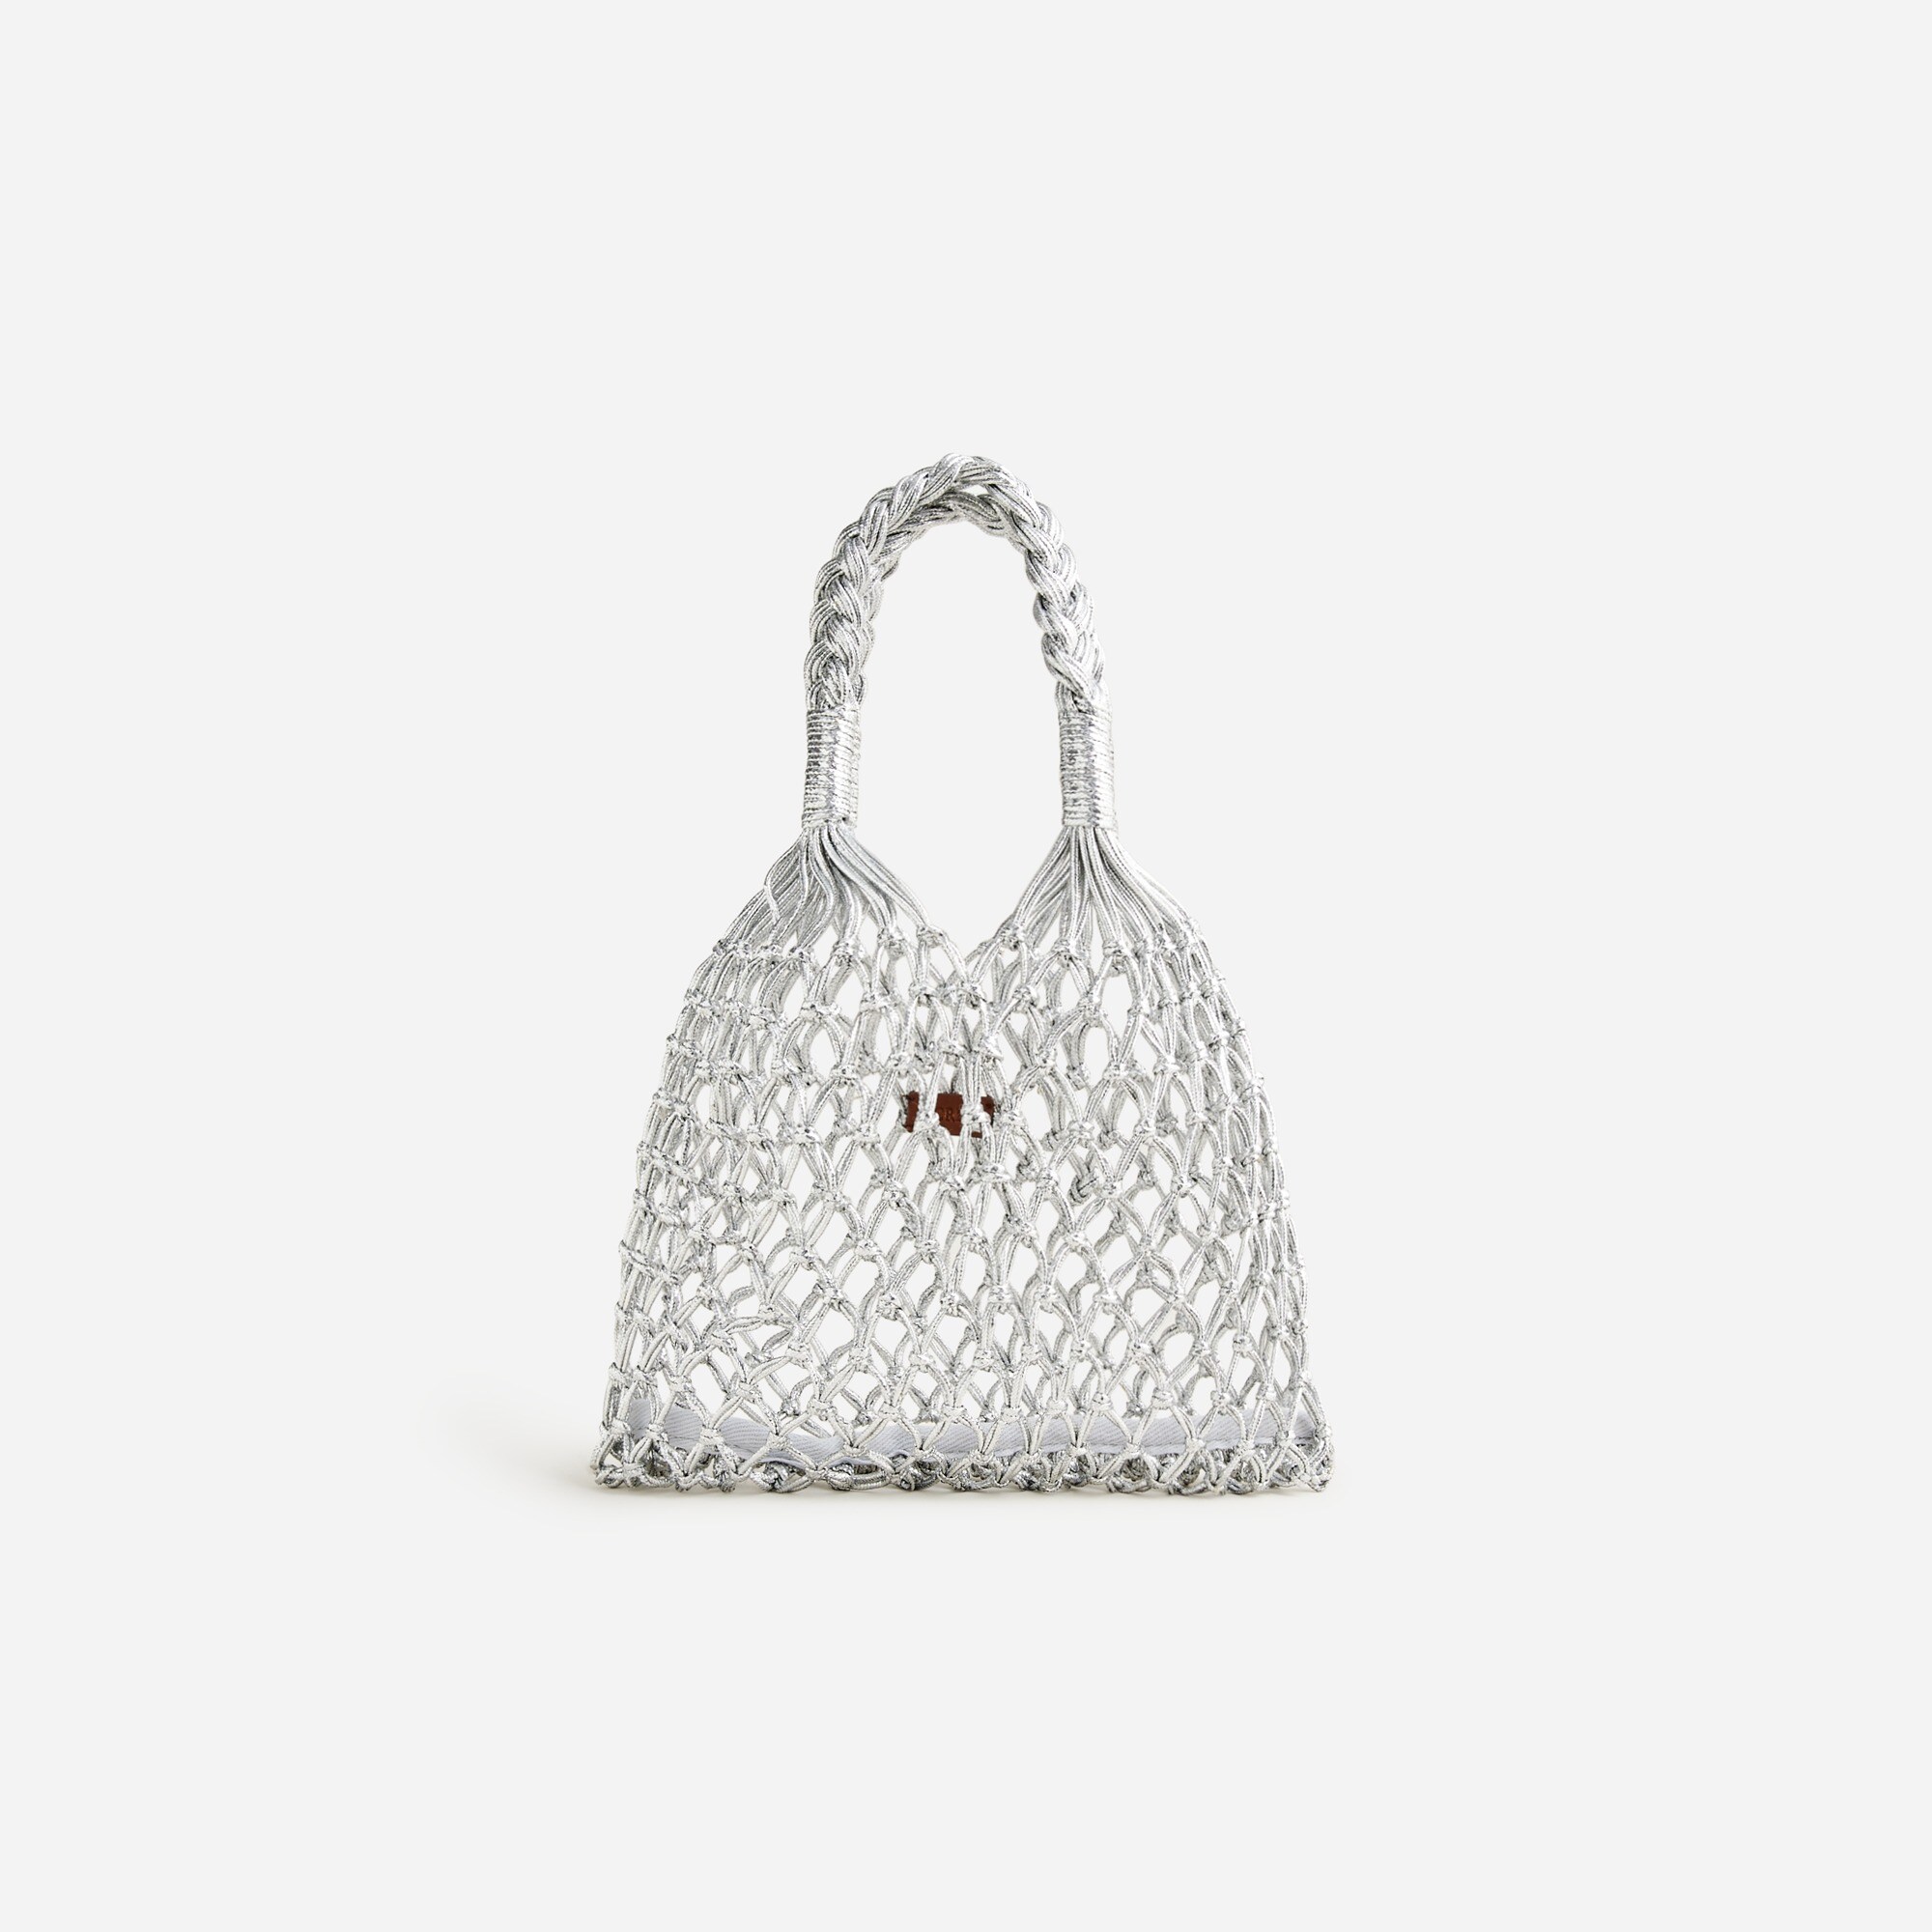  Small Cadiz hand-knotted rope tote in metallic